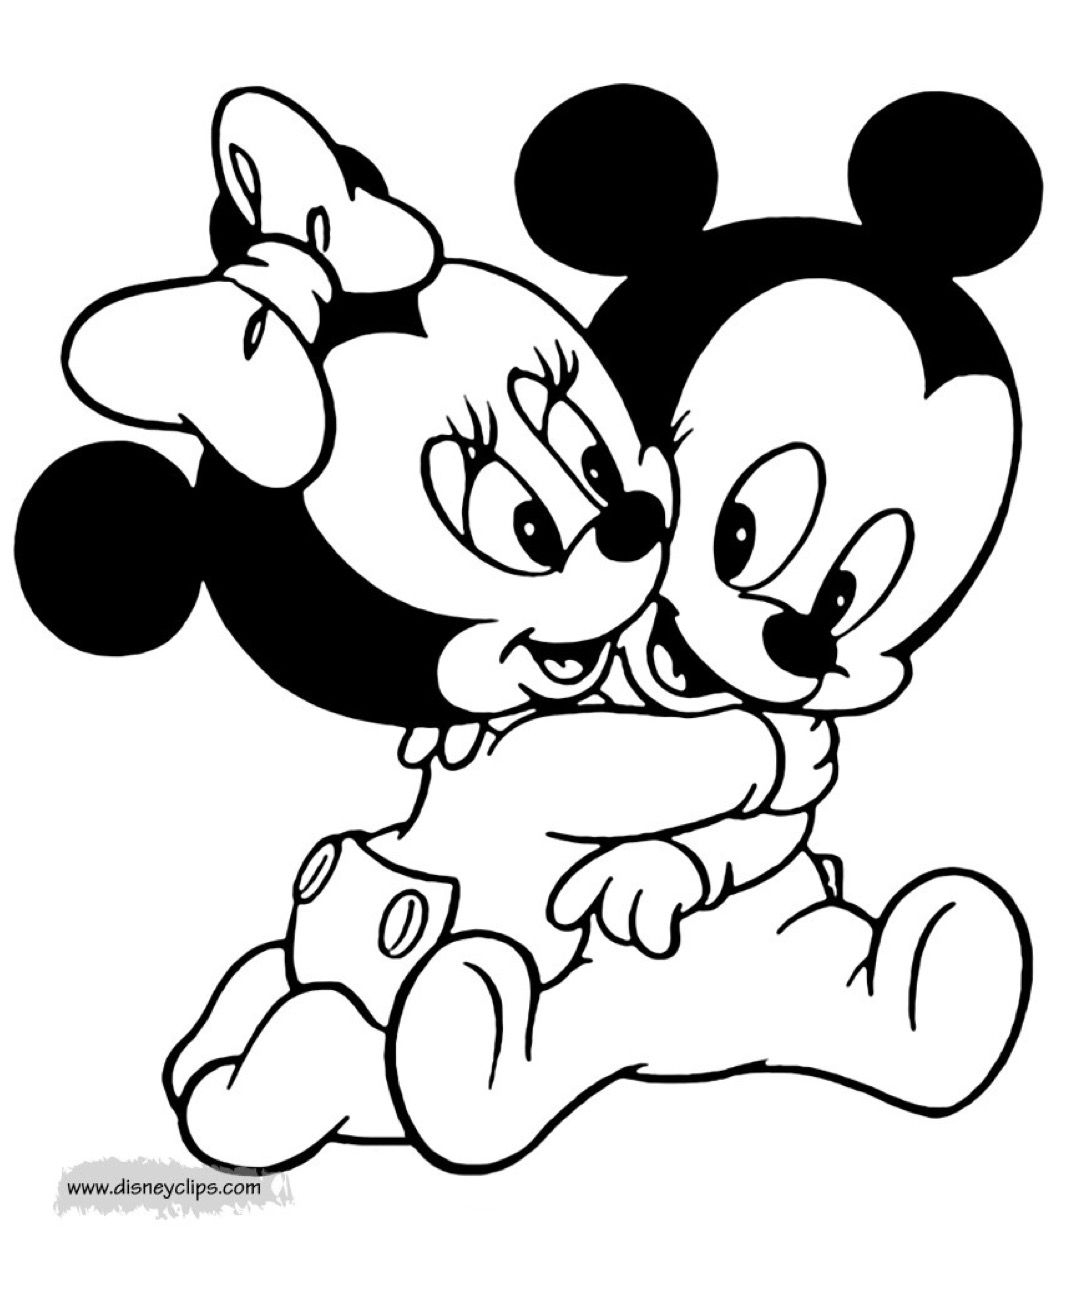 Pin By Lehla Green On Amilia First Birthday | Pinterest intérieur Coloriage Minnie Mouse,